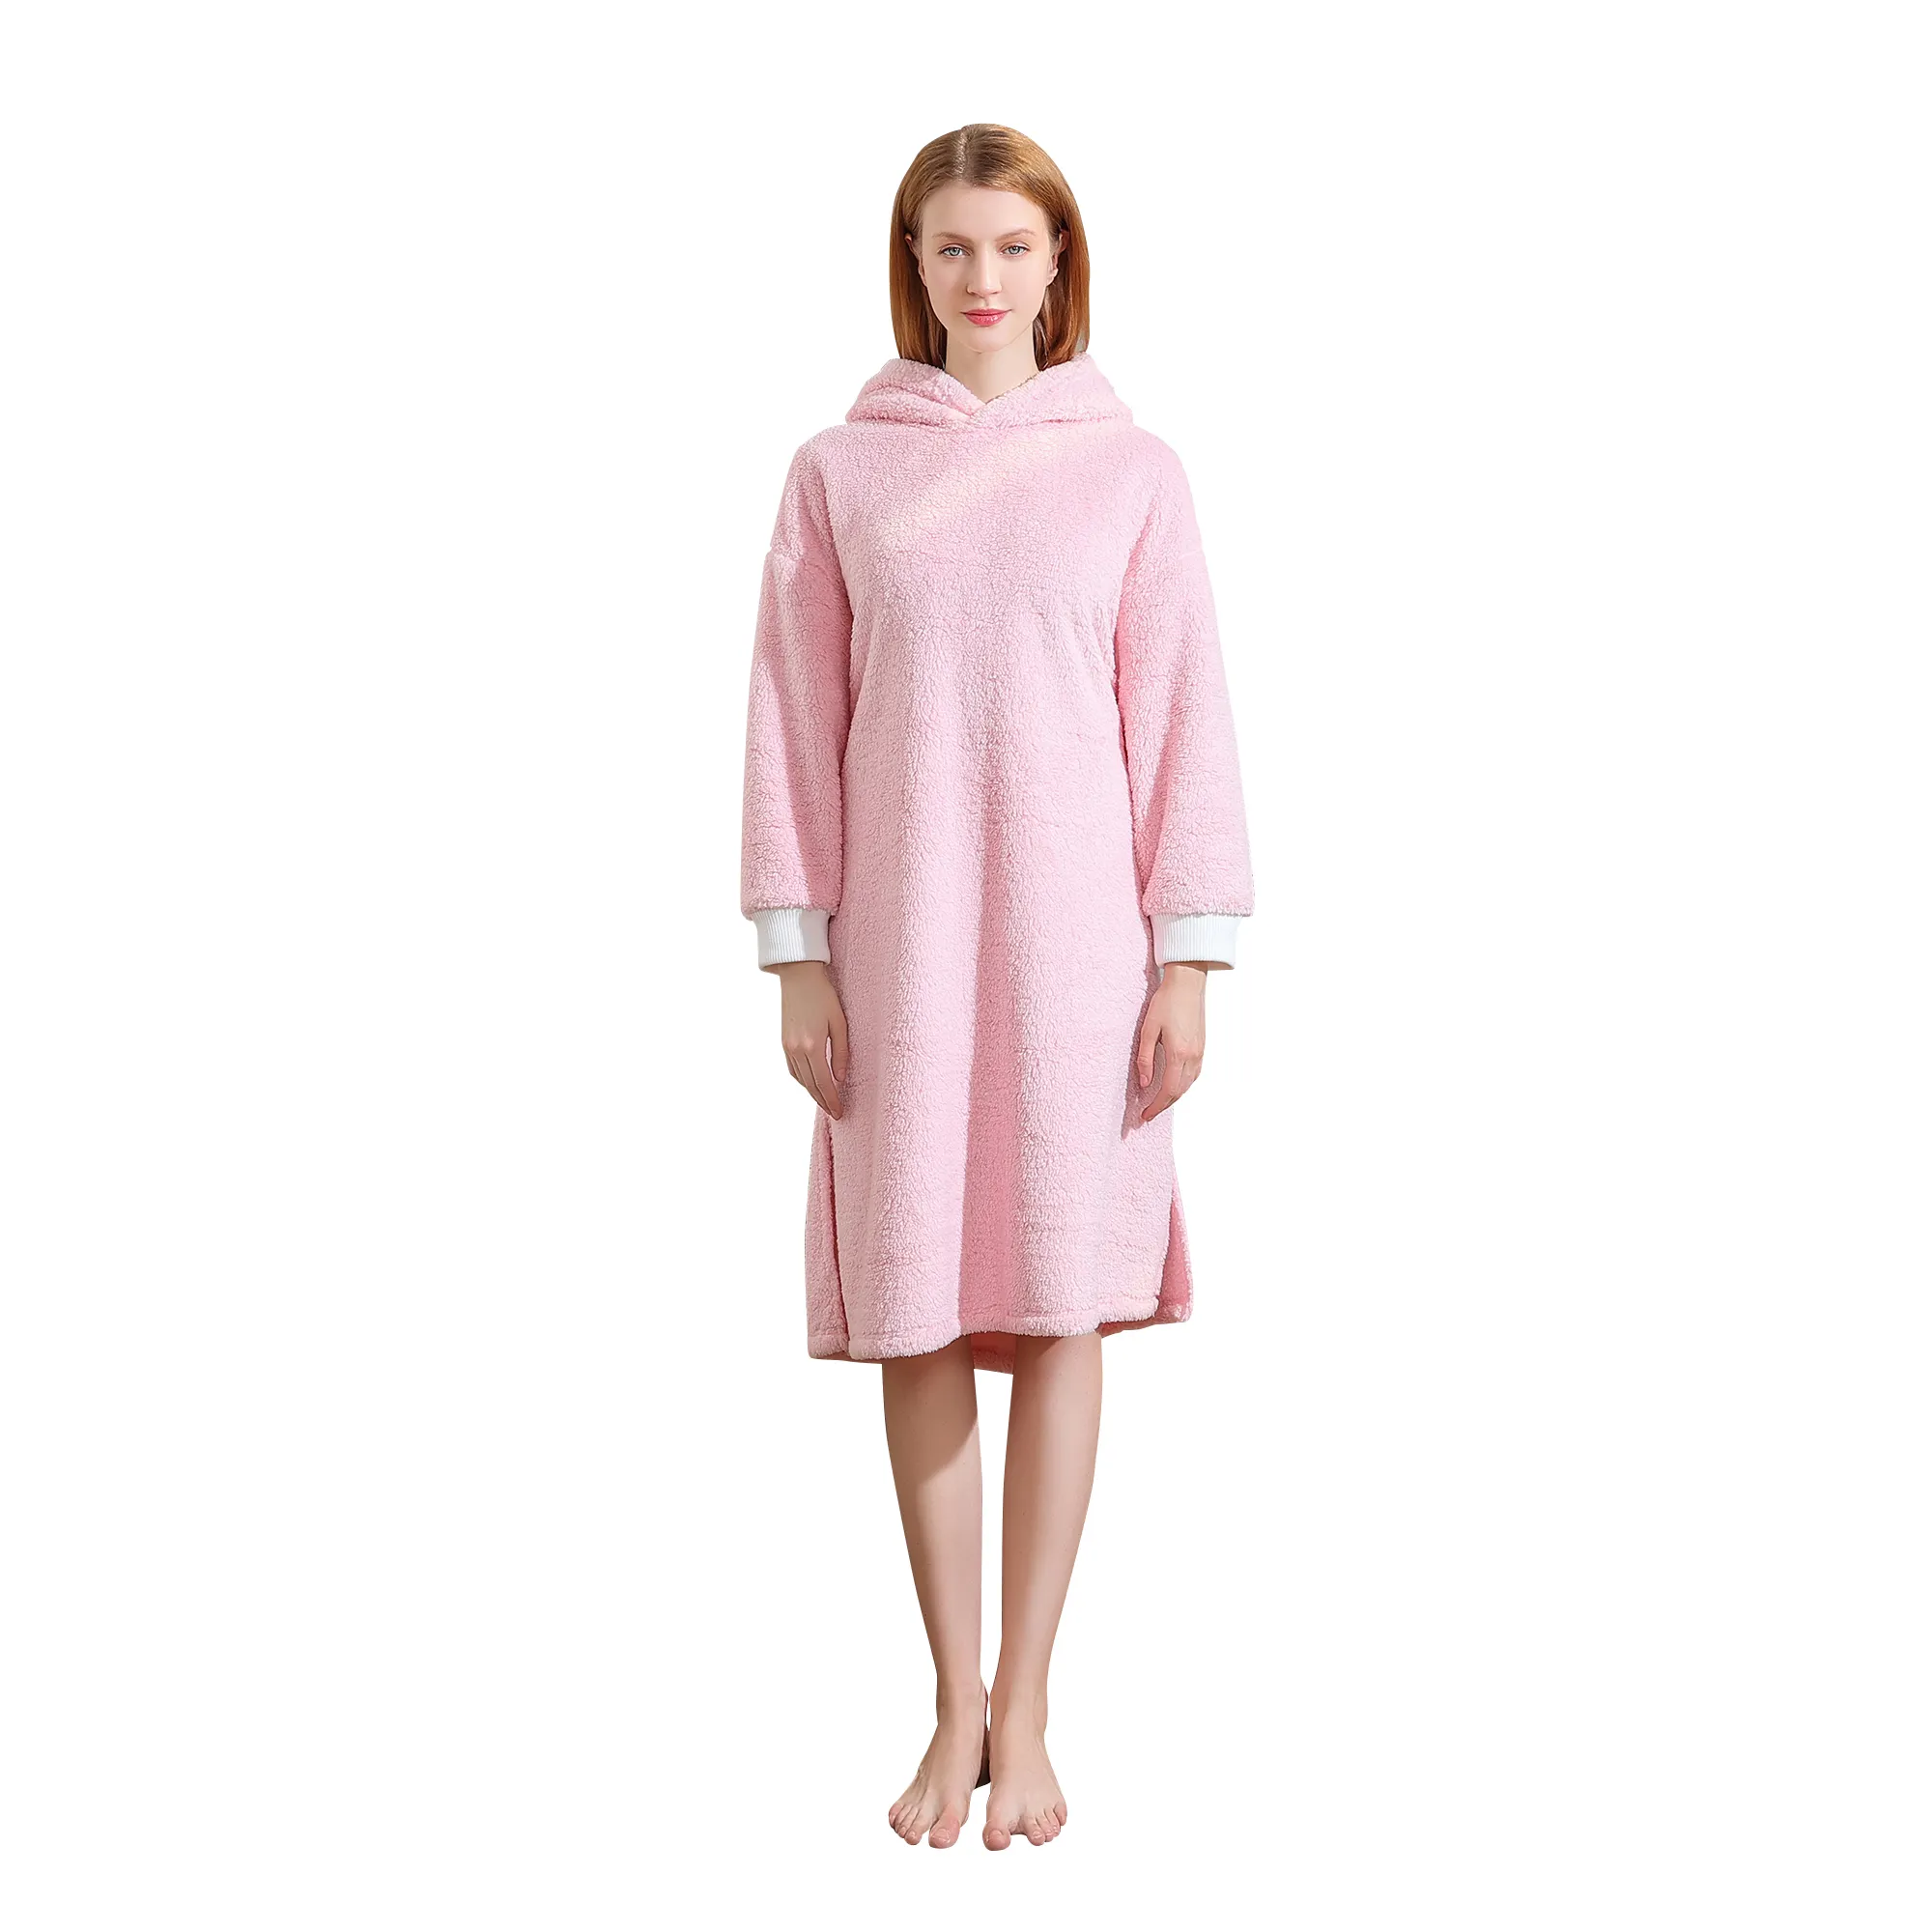 Hot selling winter coral fleece one piece night dress for women home sleep wear nightgown flannel bathrobe with hood for ladies